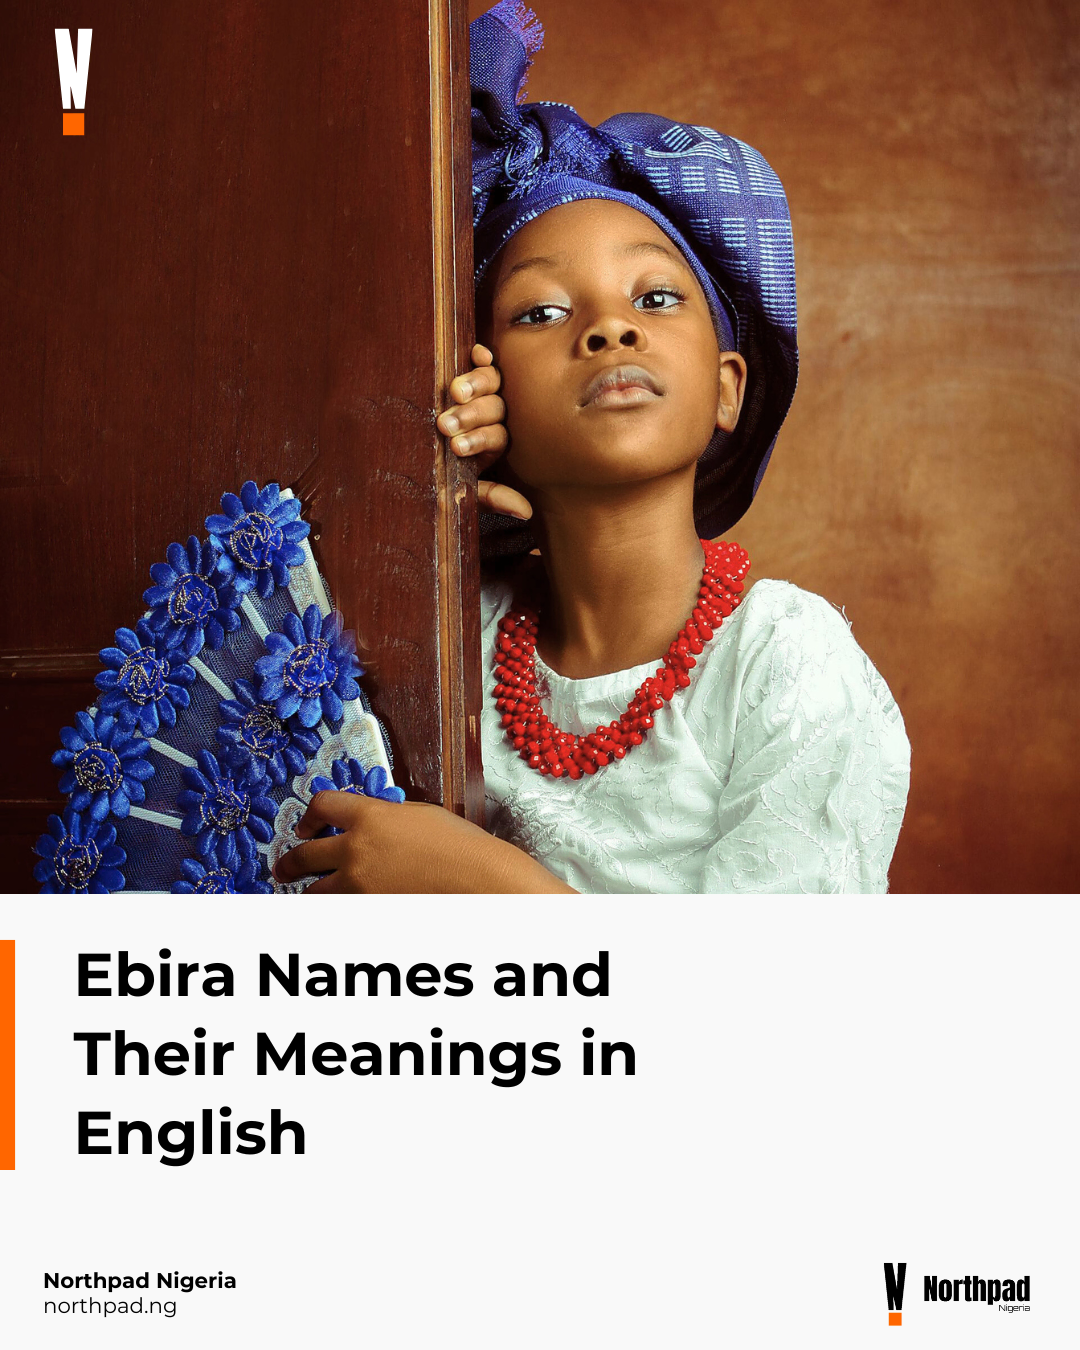 Ebira Names and Their Meanings in English